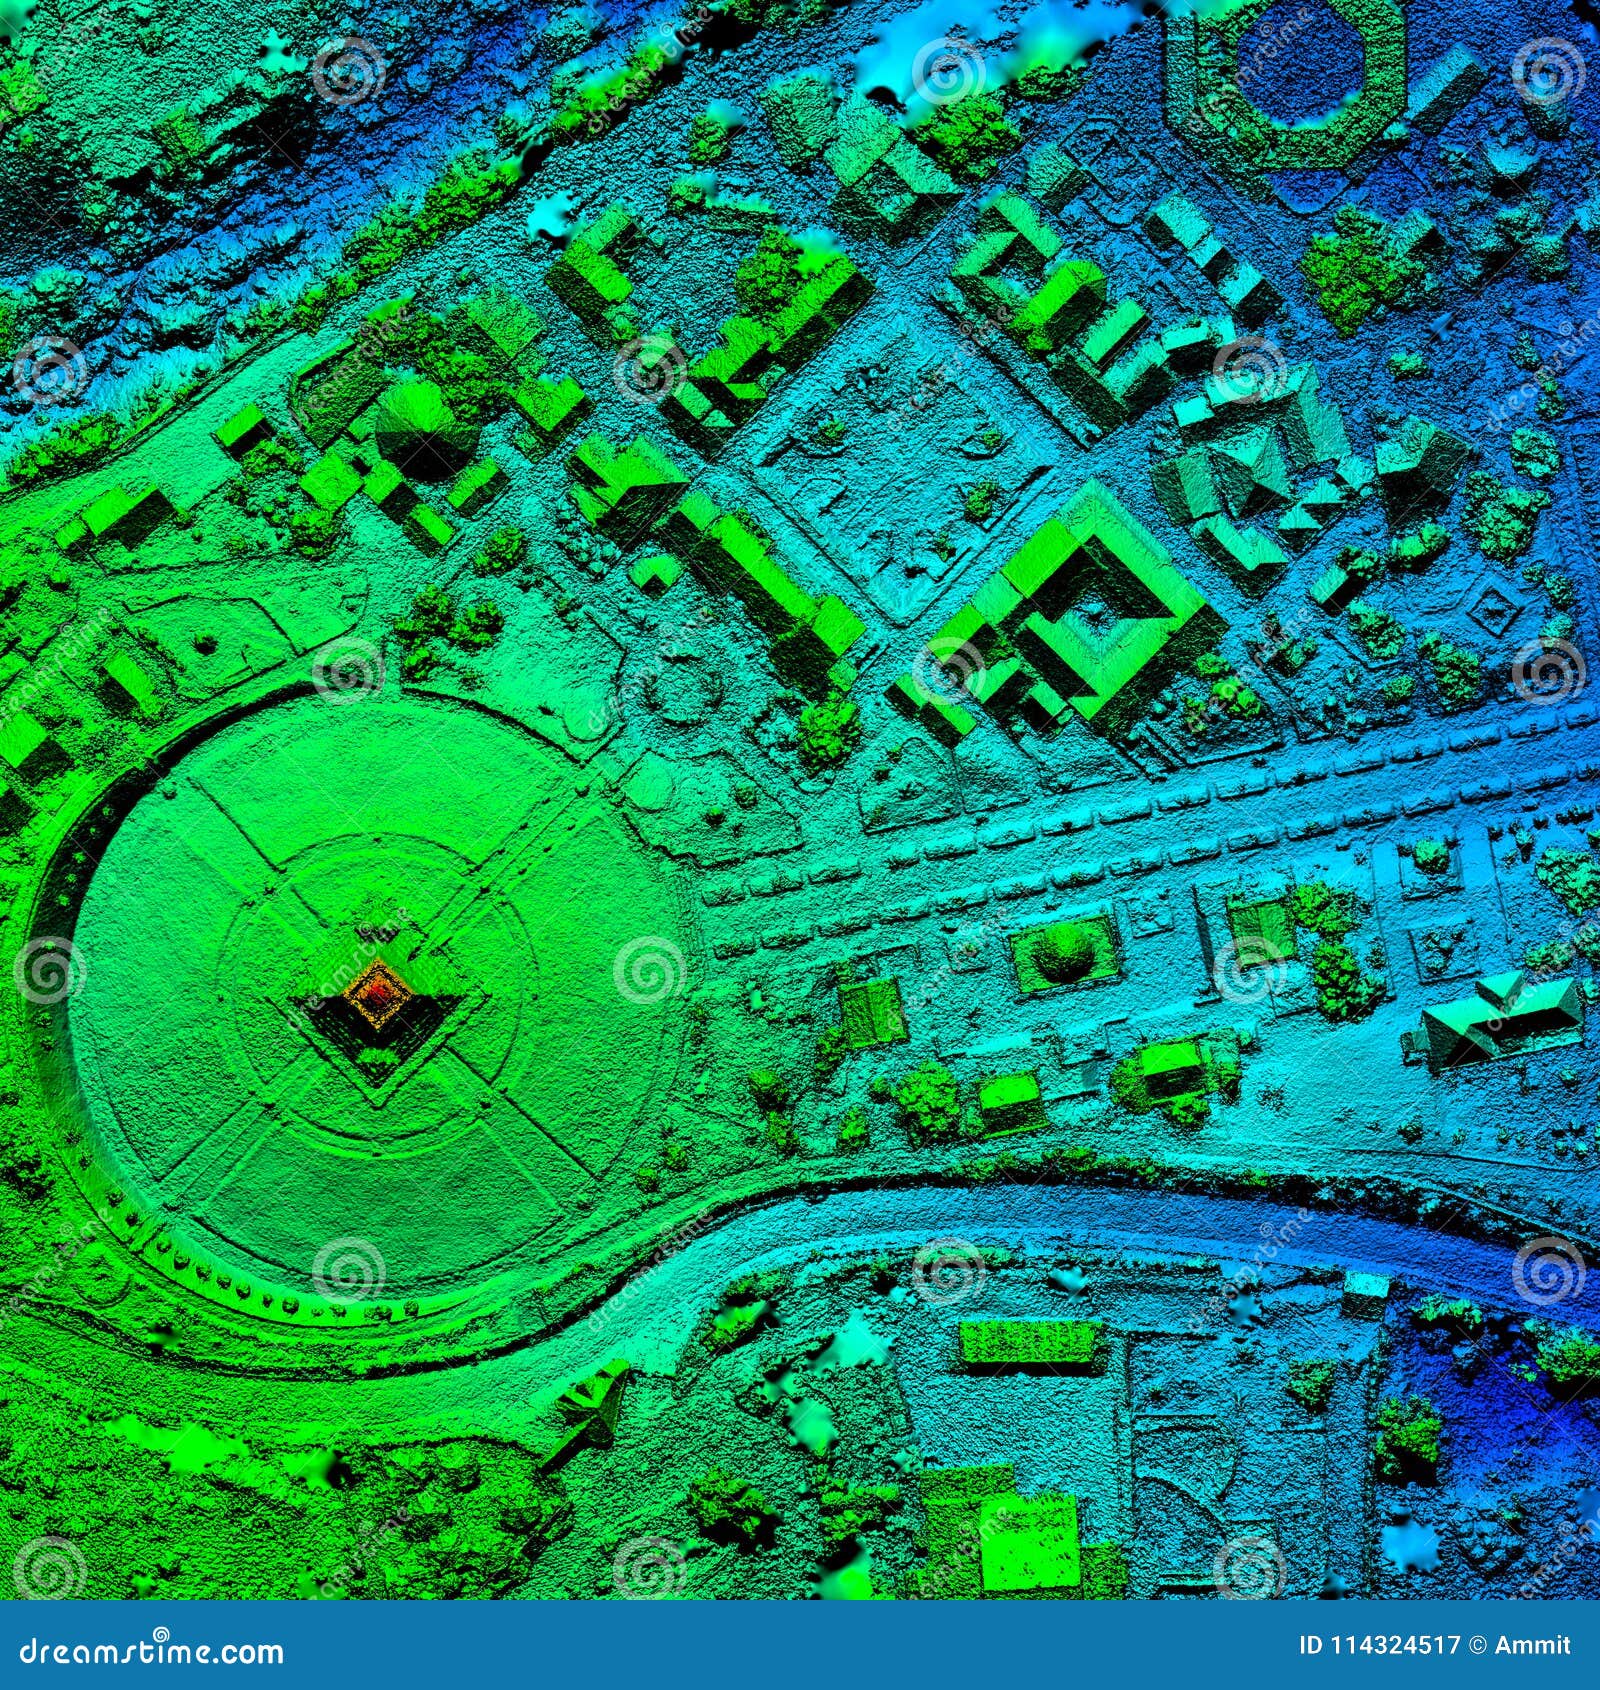 high resolution orthorectified, orthorectification aerial map used for photogrammetry